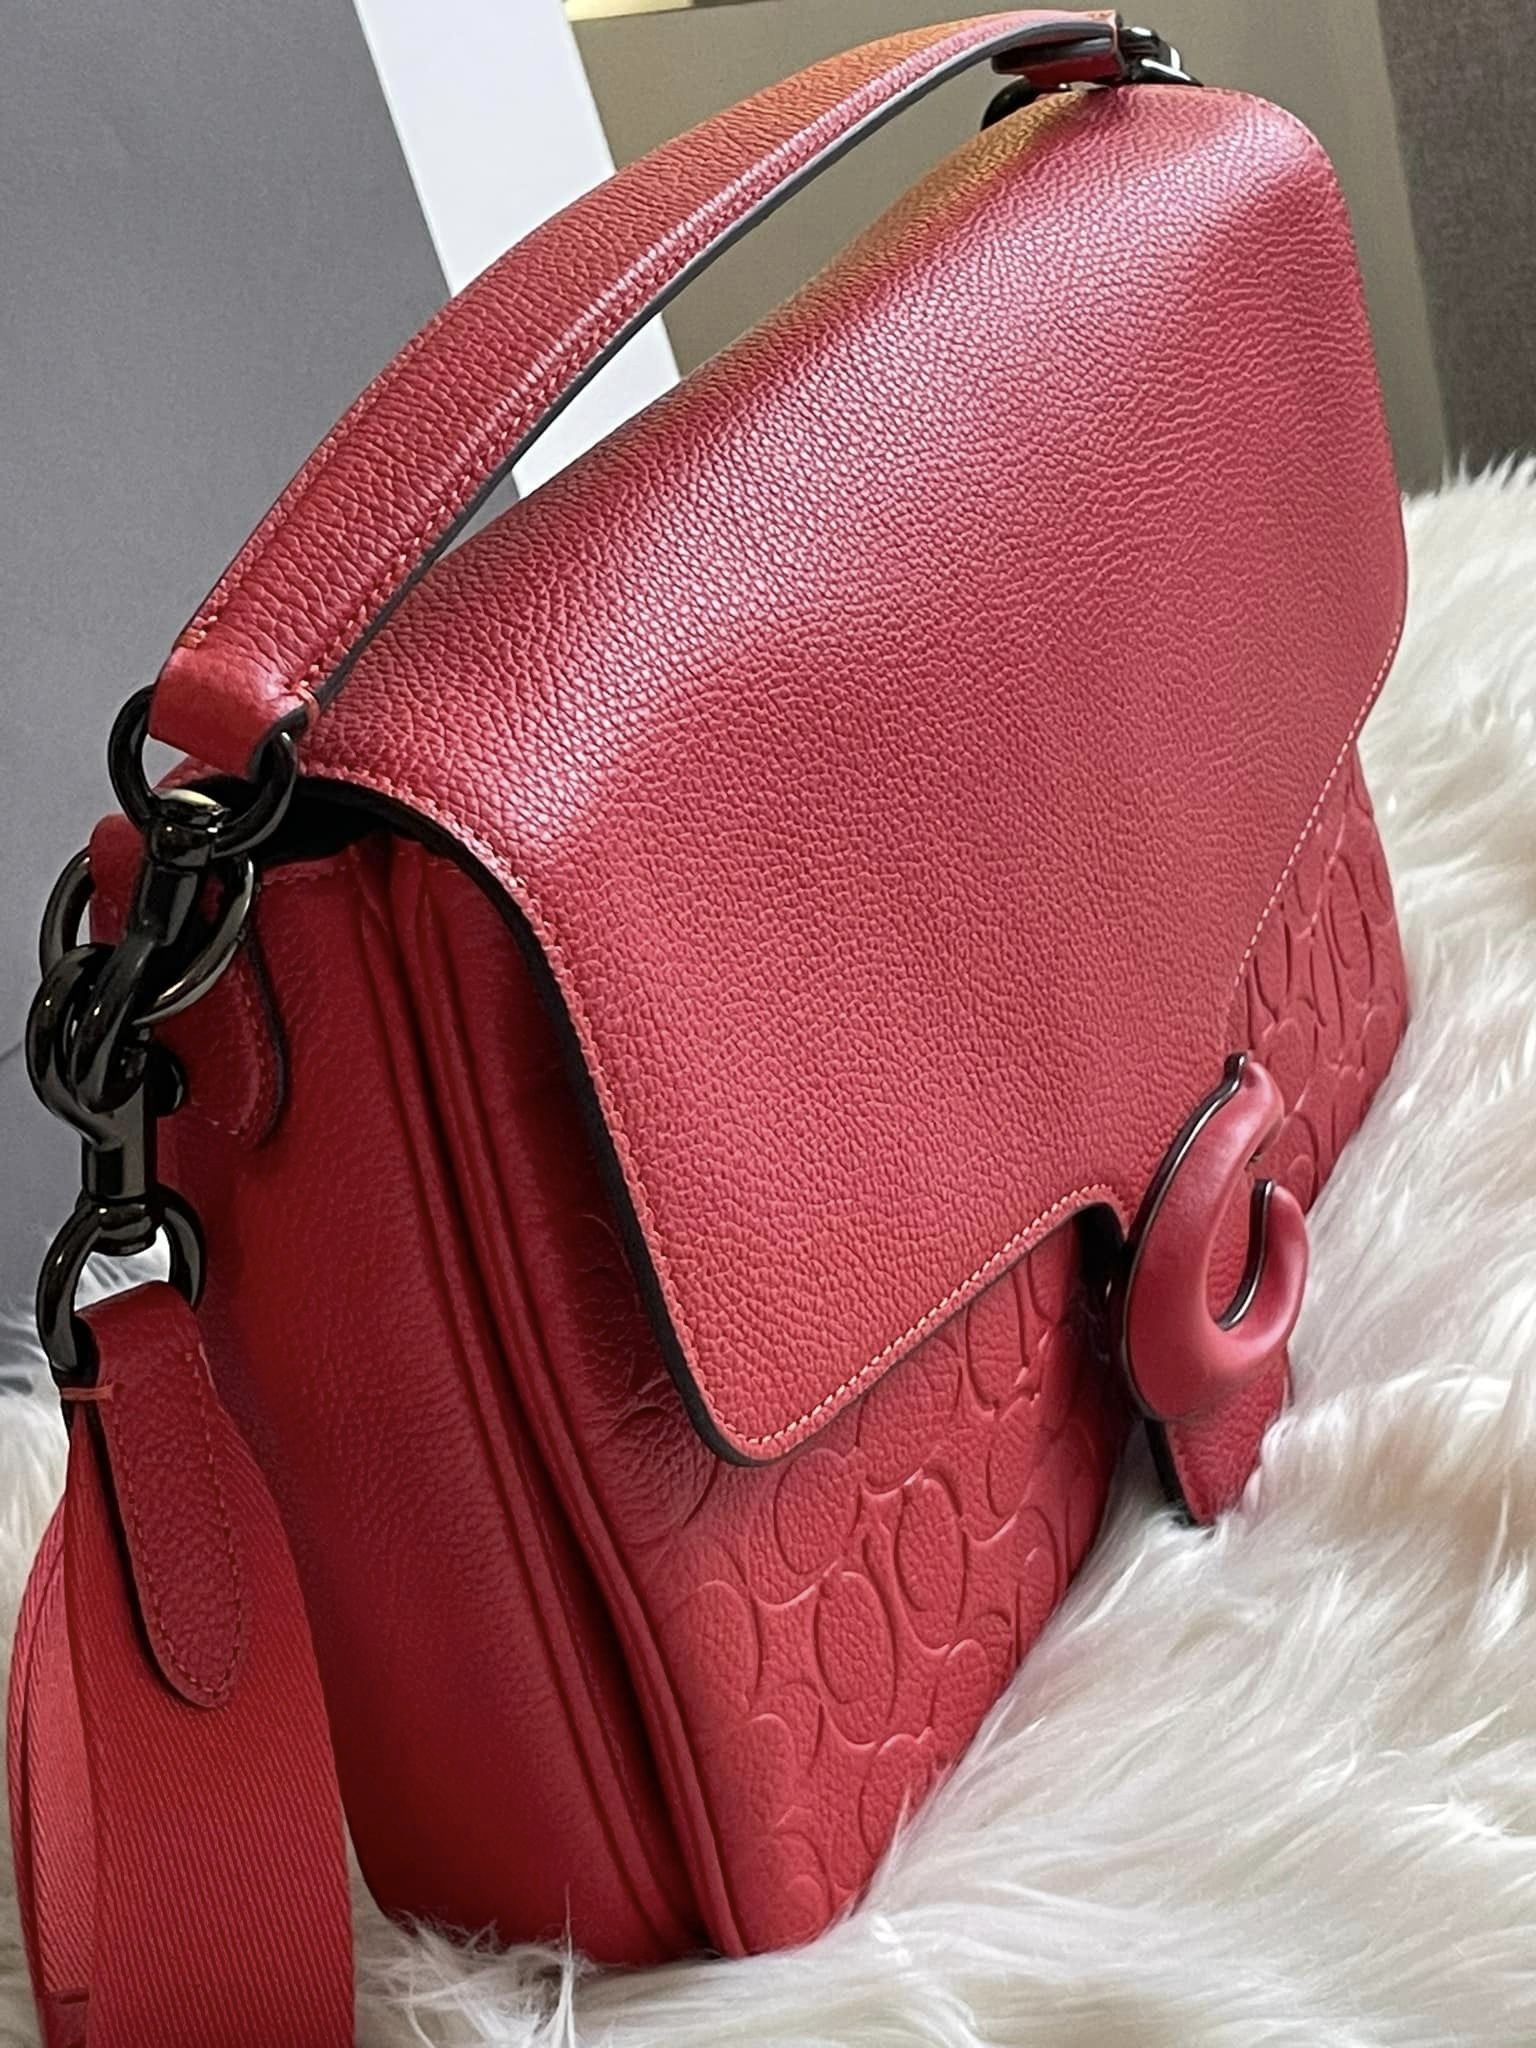 Coach Tabby Signature Leather Shoulder Bag